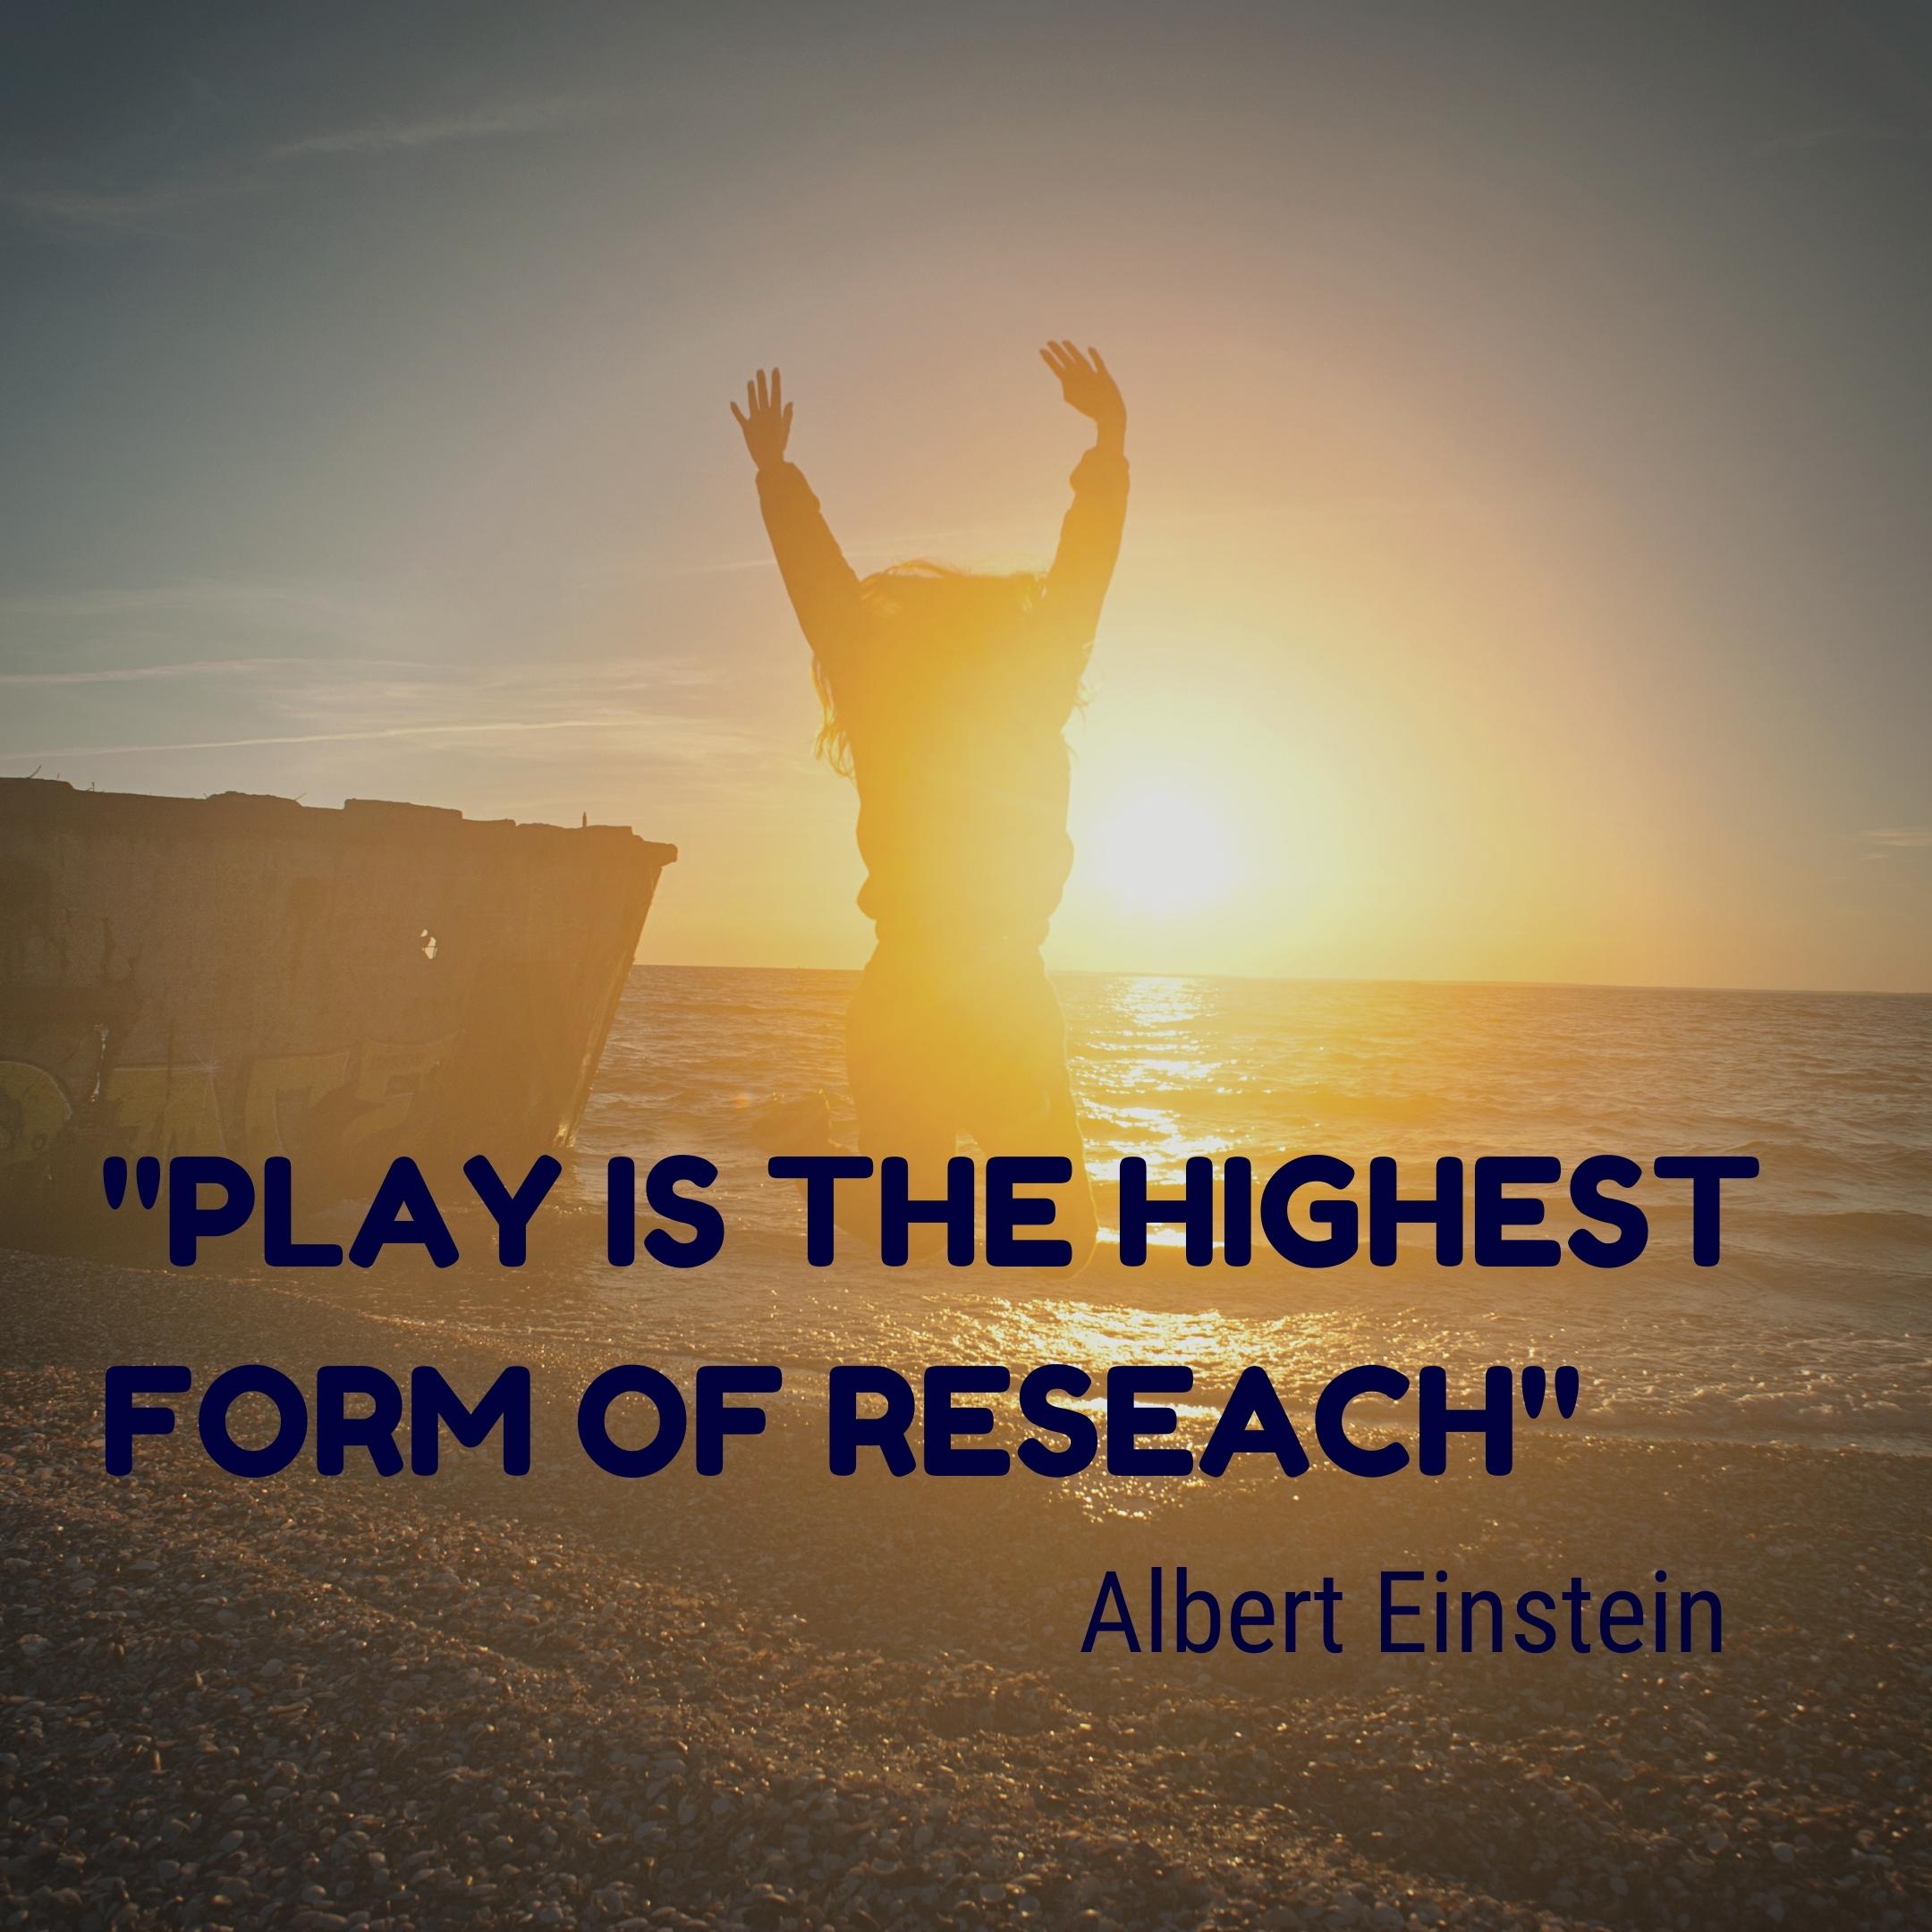 play is the highest form of research